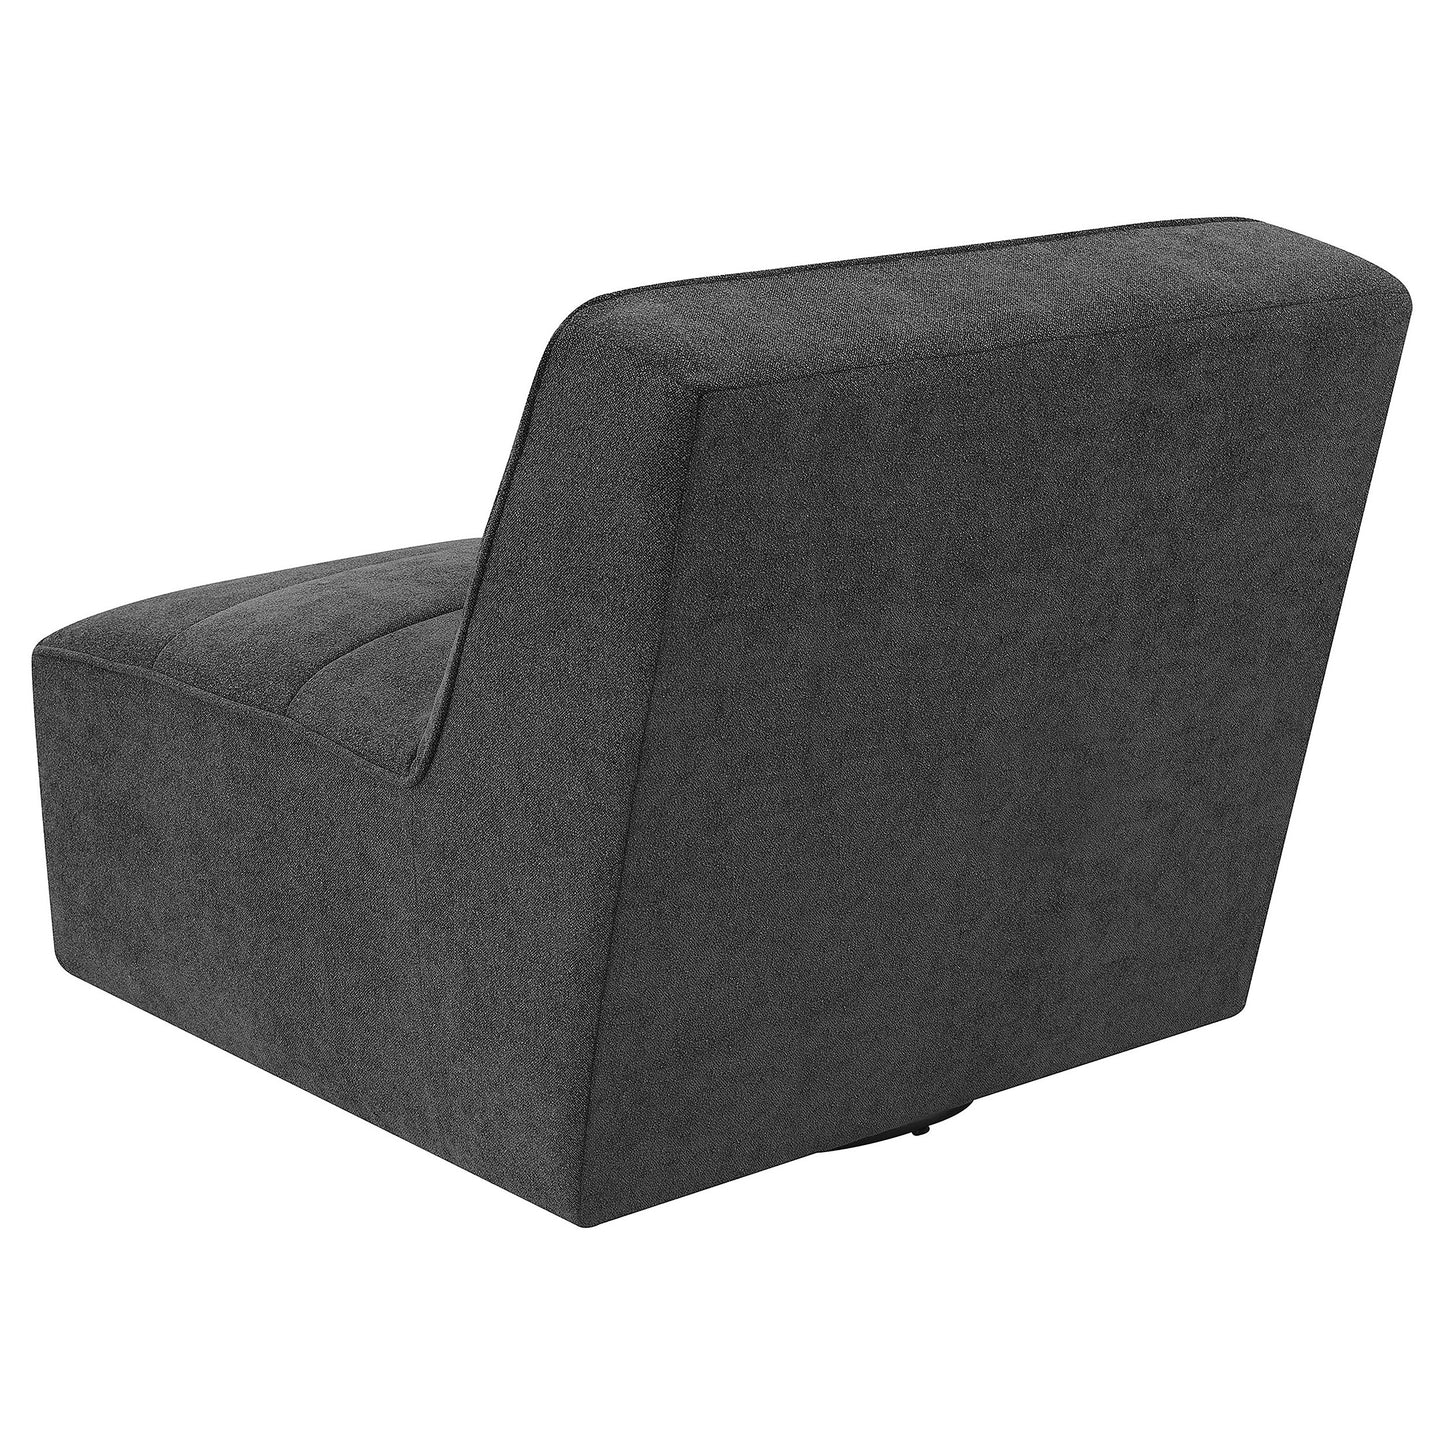 Cobie Upholstered Swivel Armless Chair Dark Charcoal